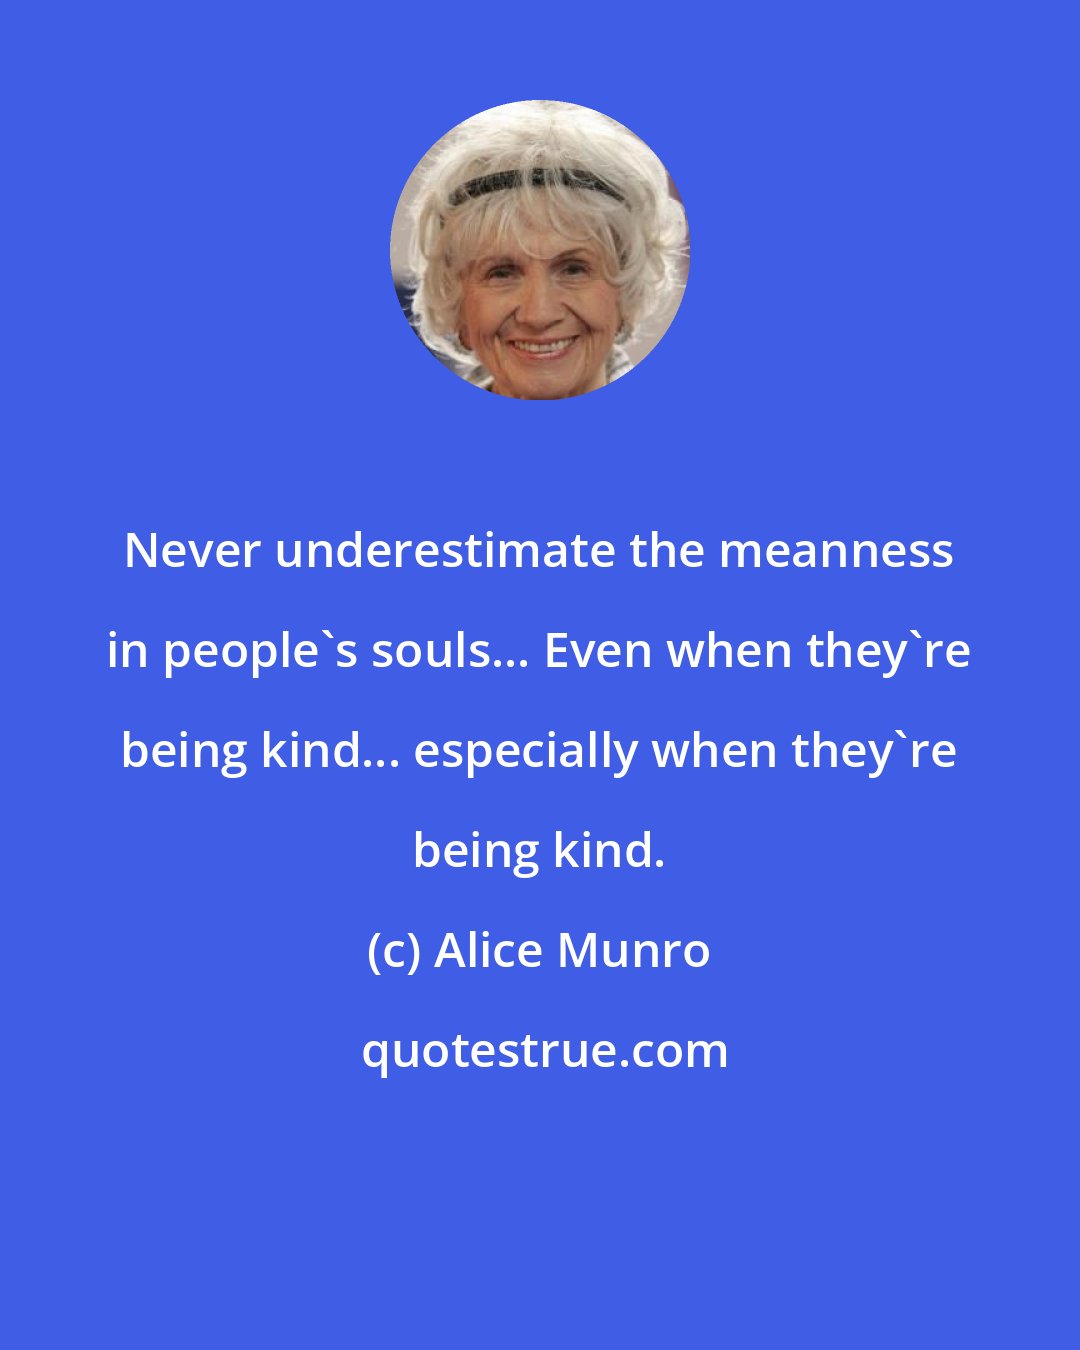 Alice Munro: Never underestimate the meanness in people's souls... Even when they're being kind... especially when they're being kind.